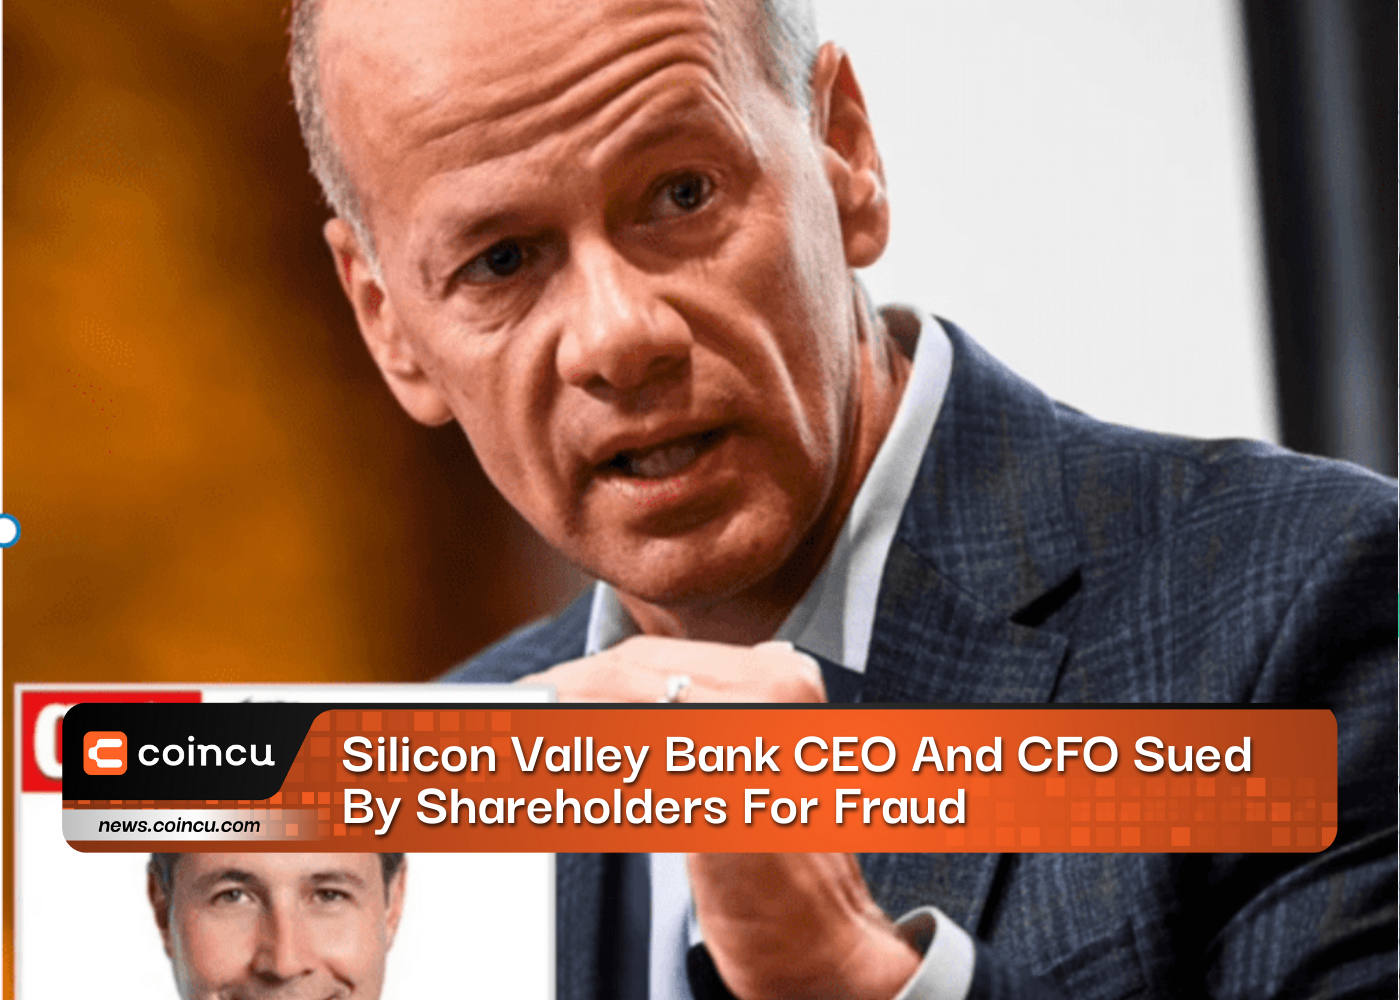 Silicon Valley Bank CEO And CFO Sued By Shareholders For Fraud